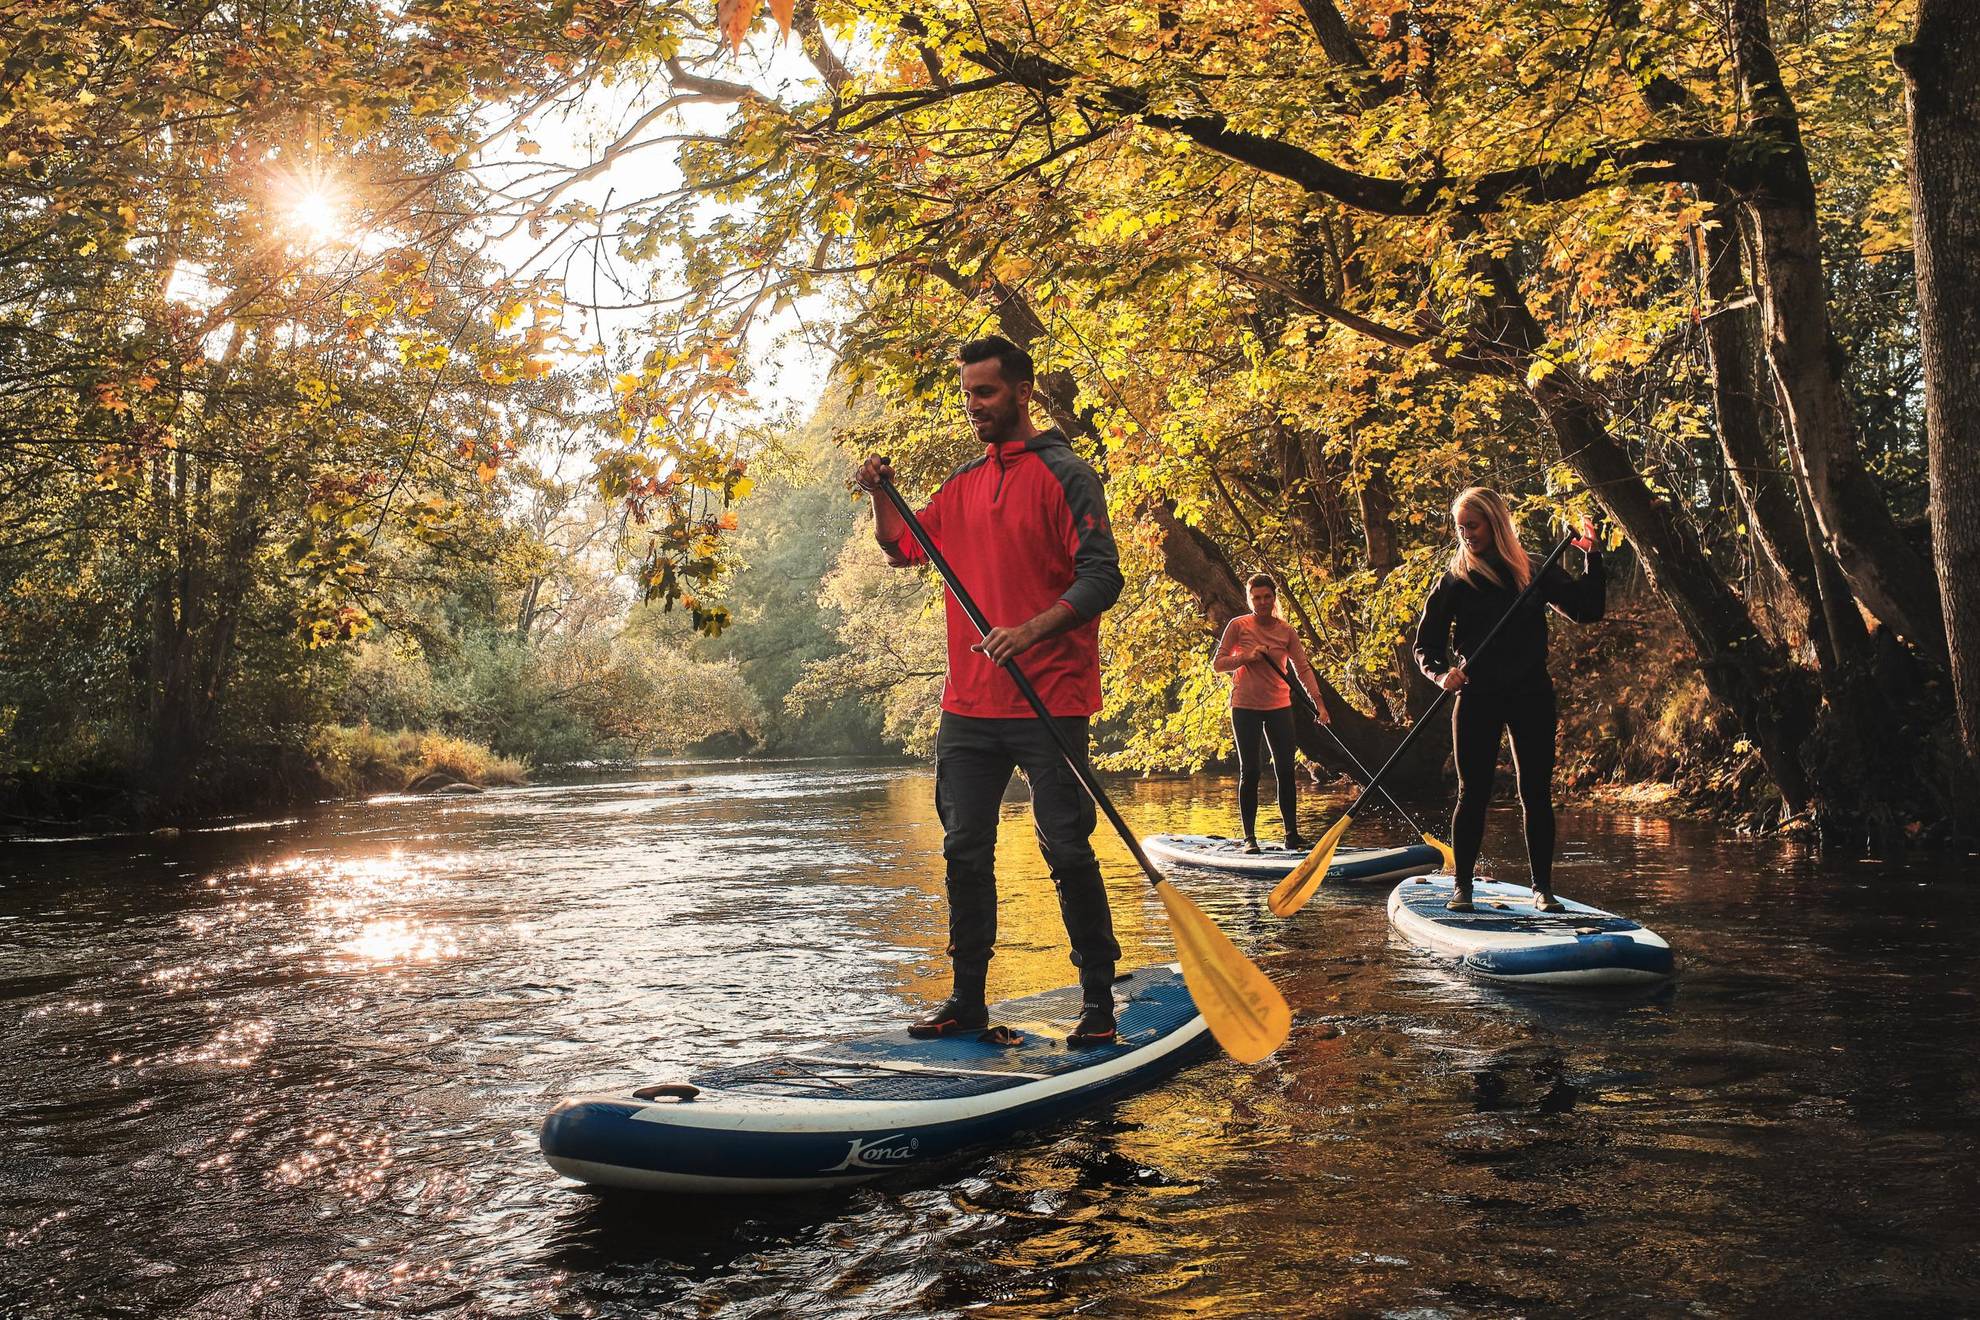 Three persons are each standing on a paddleboard, holding their paddles. The surrounding trees have leaves shifting from green to yellow and orange, giving hints of autumn. The sun is shining through the leafy branches.